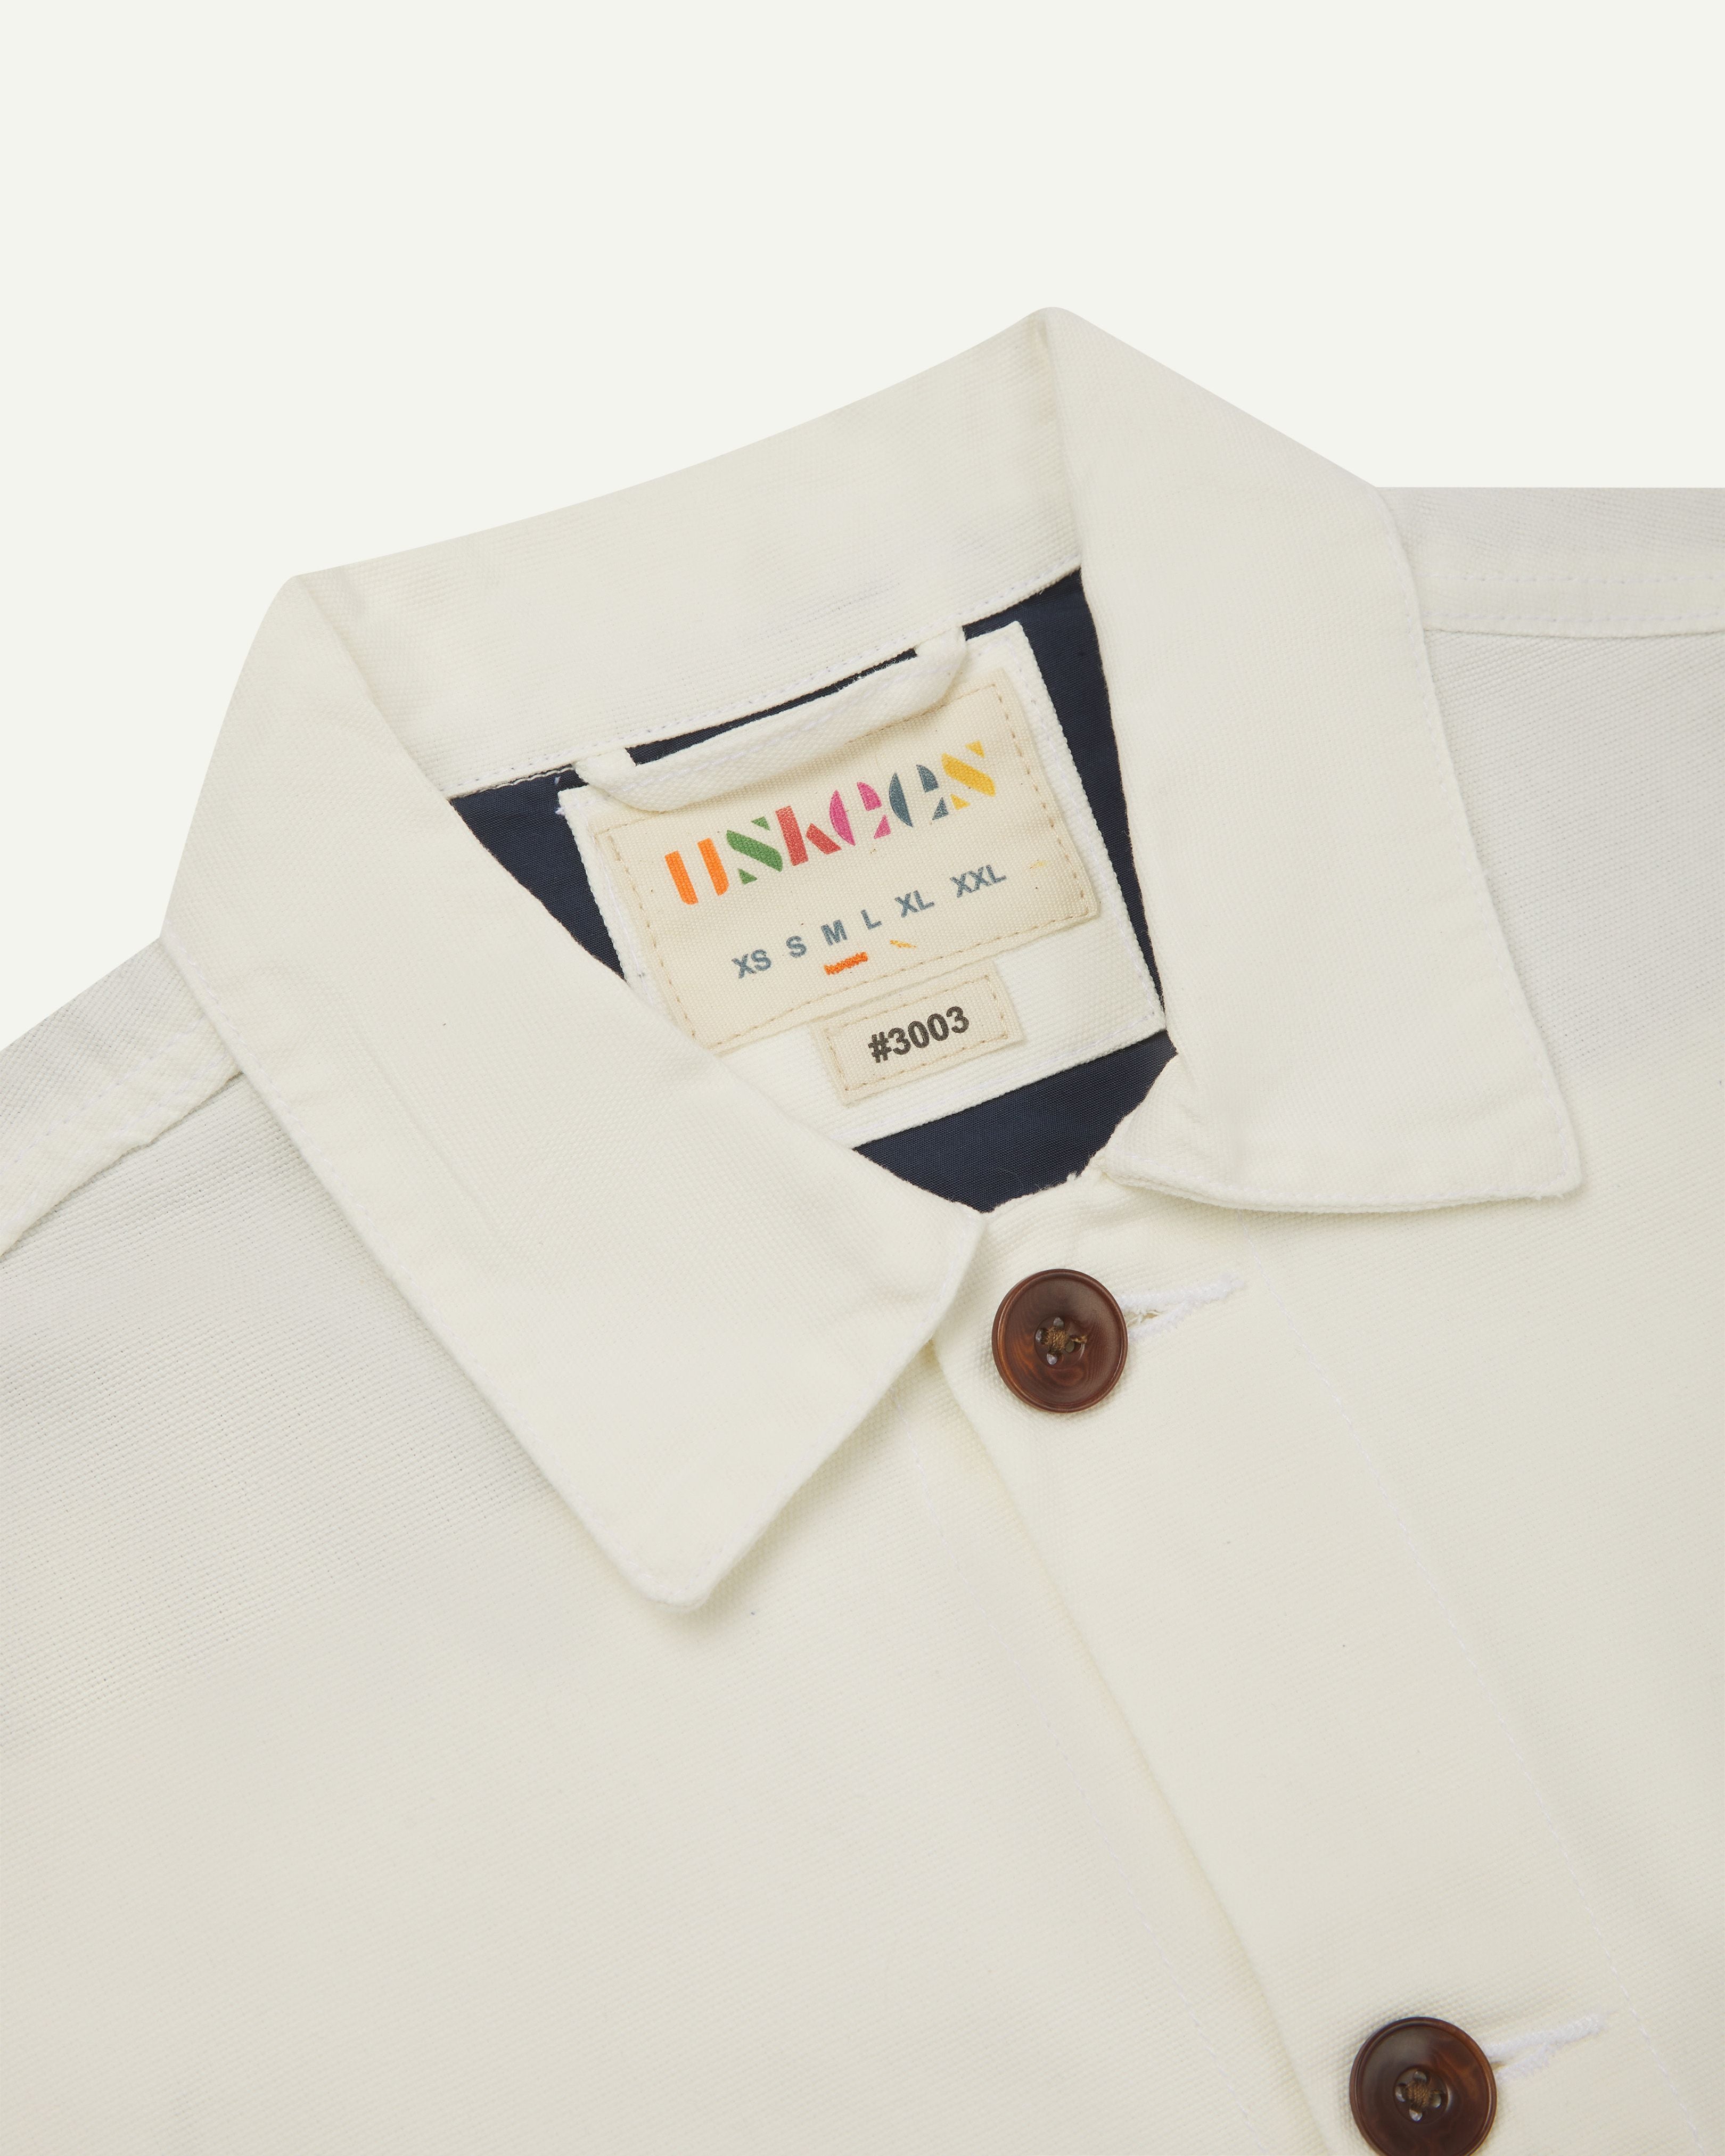 Front close-up view of cream buttoned 3003 workshirt from Uskees. Showing brand label, navy yoke lining and brown corozo buttons